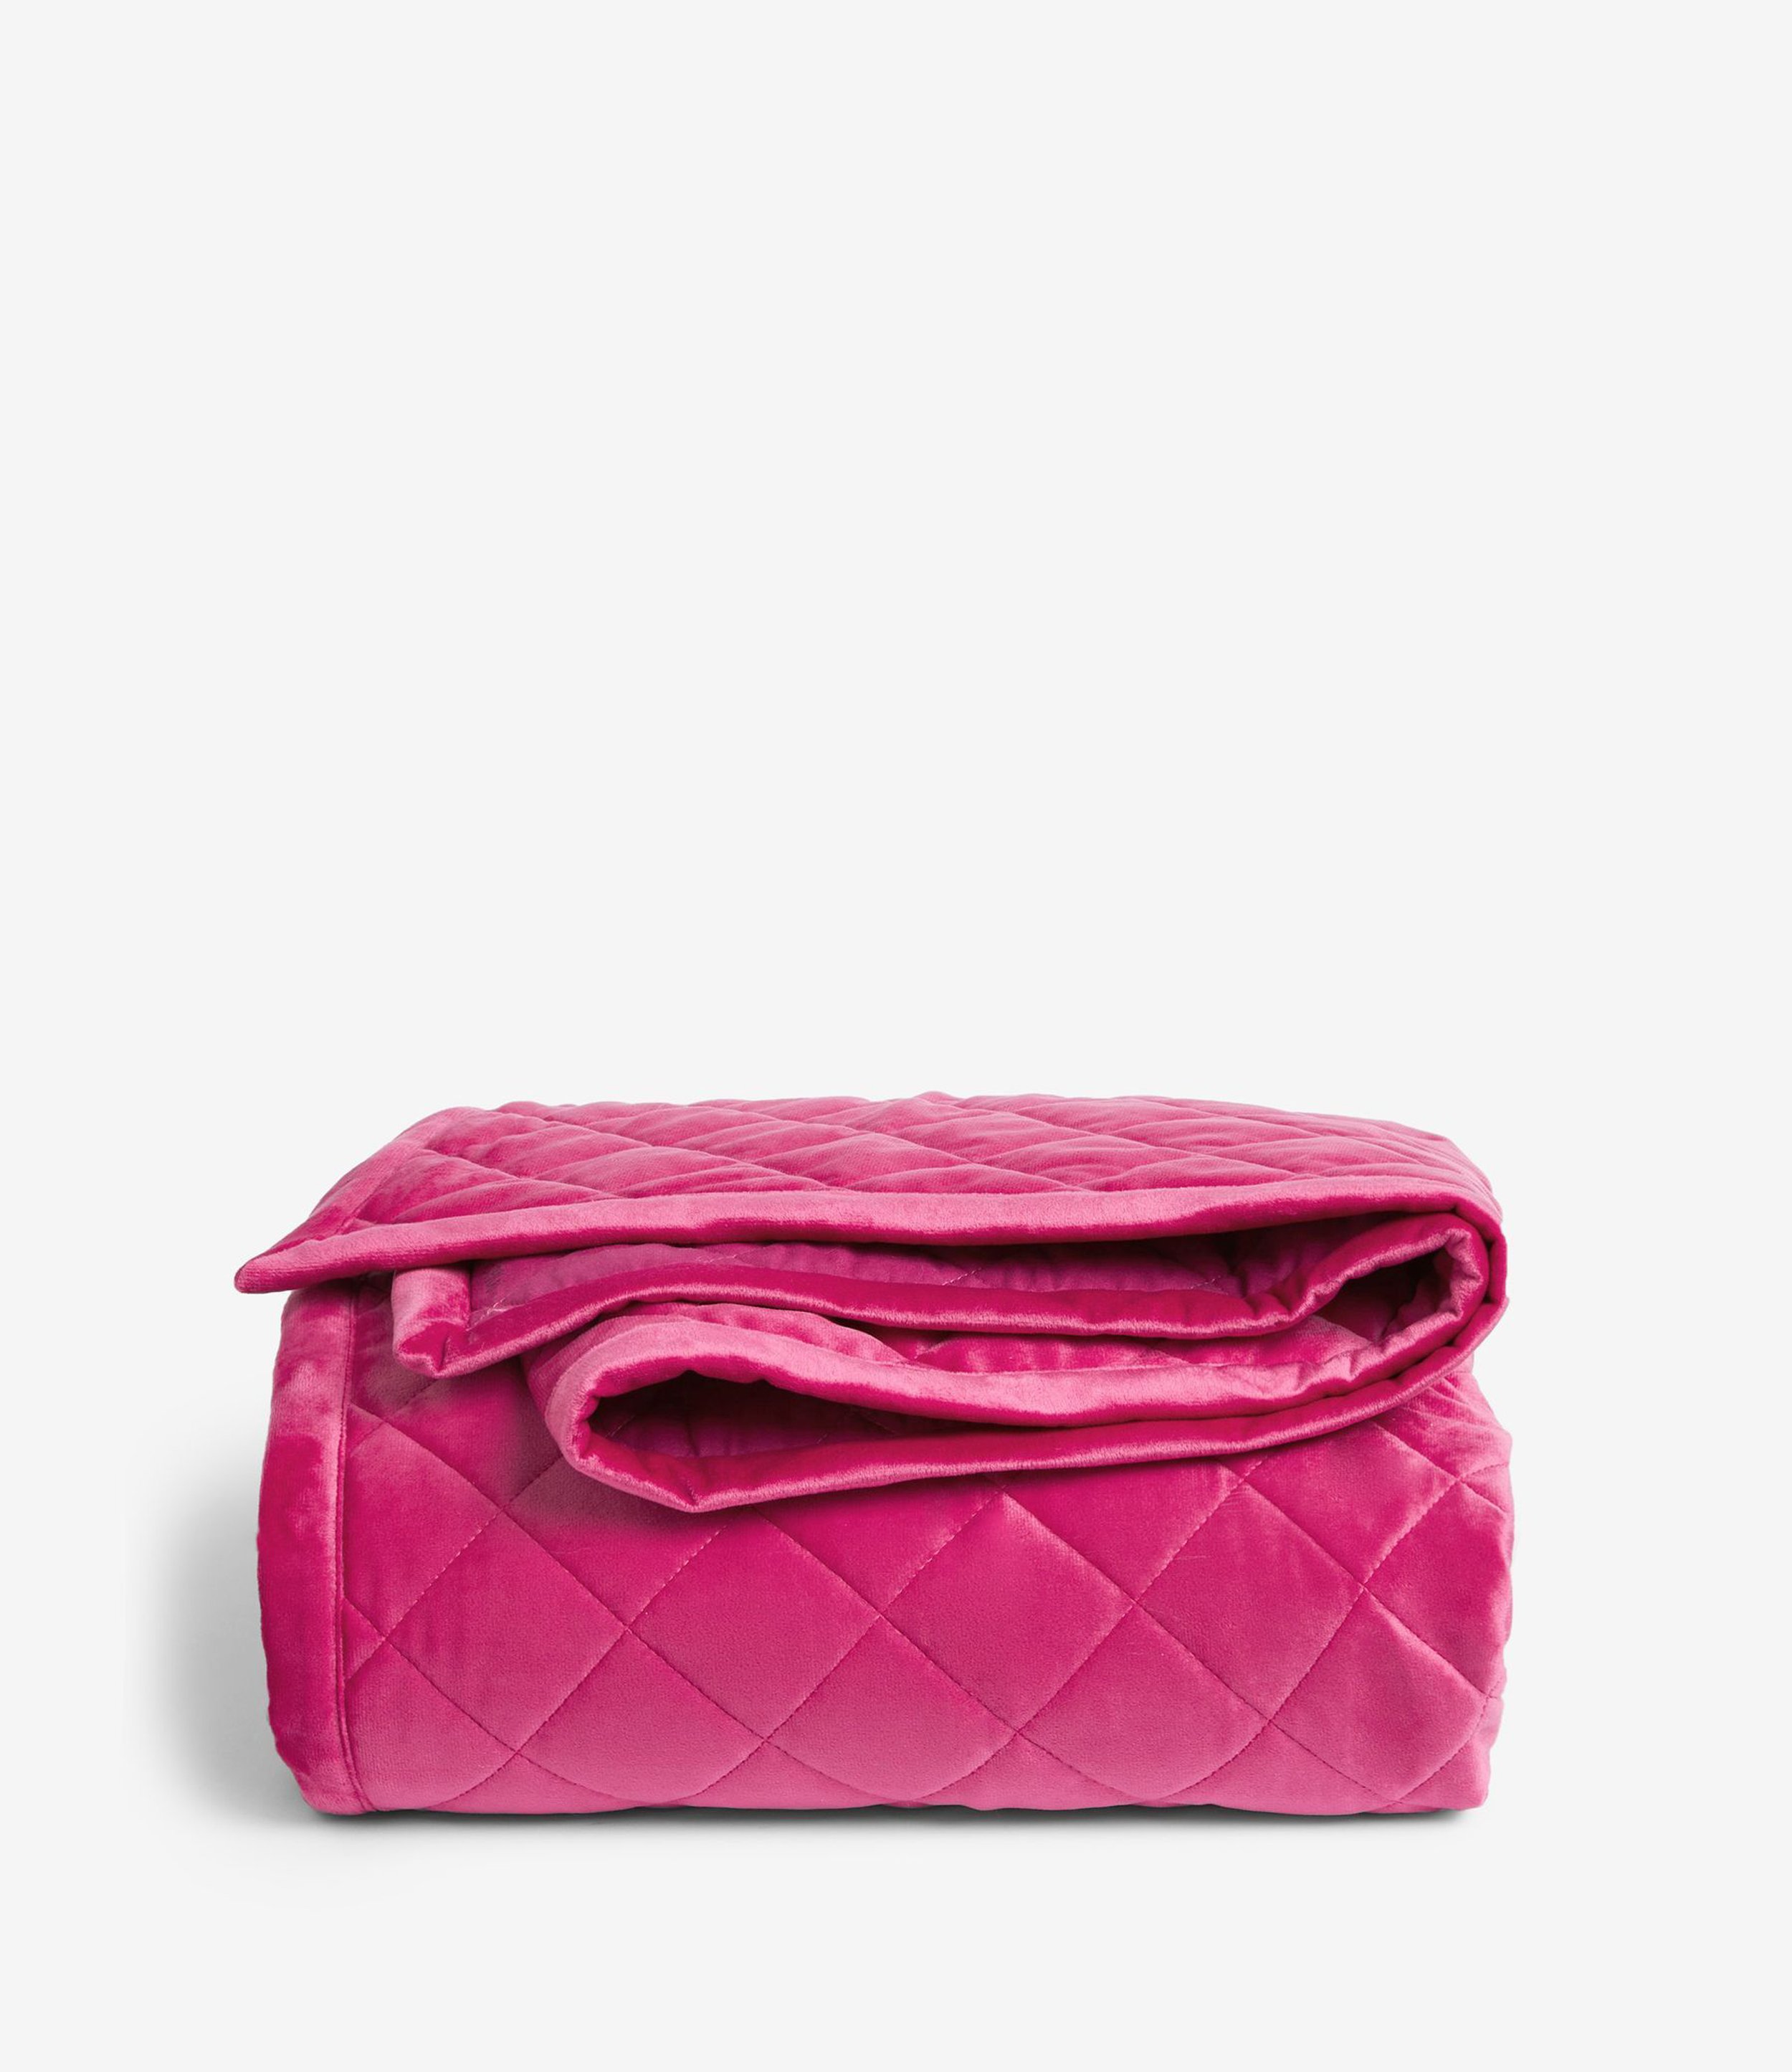 9. Hamilton Velvet Quilted Bedspread in Fuchsia Pink, from €72,